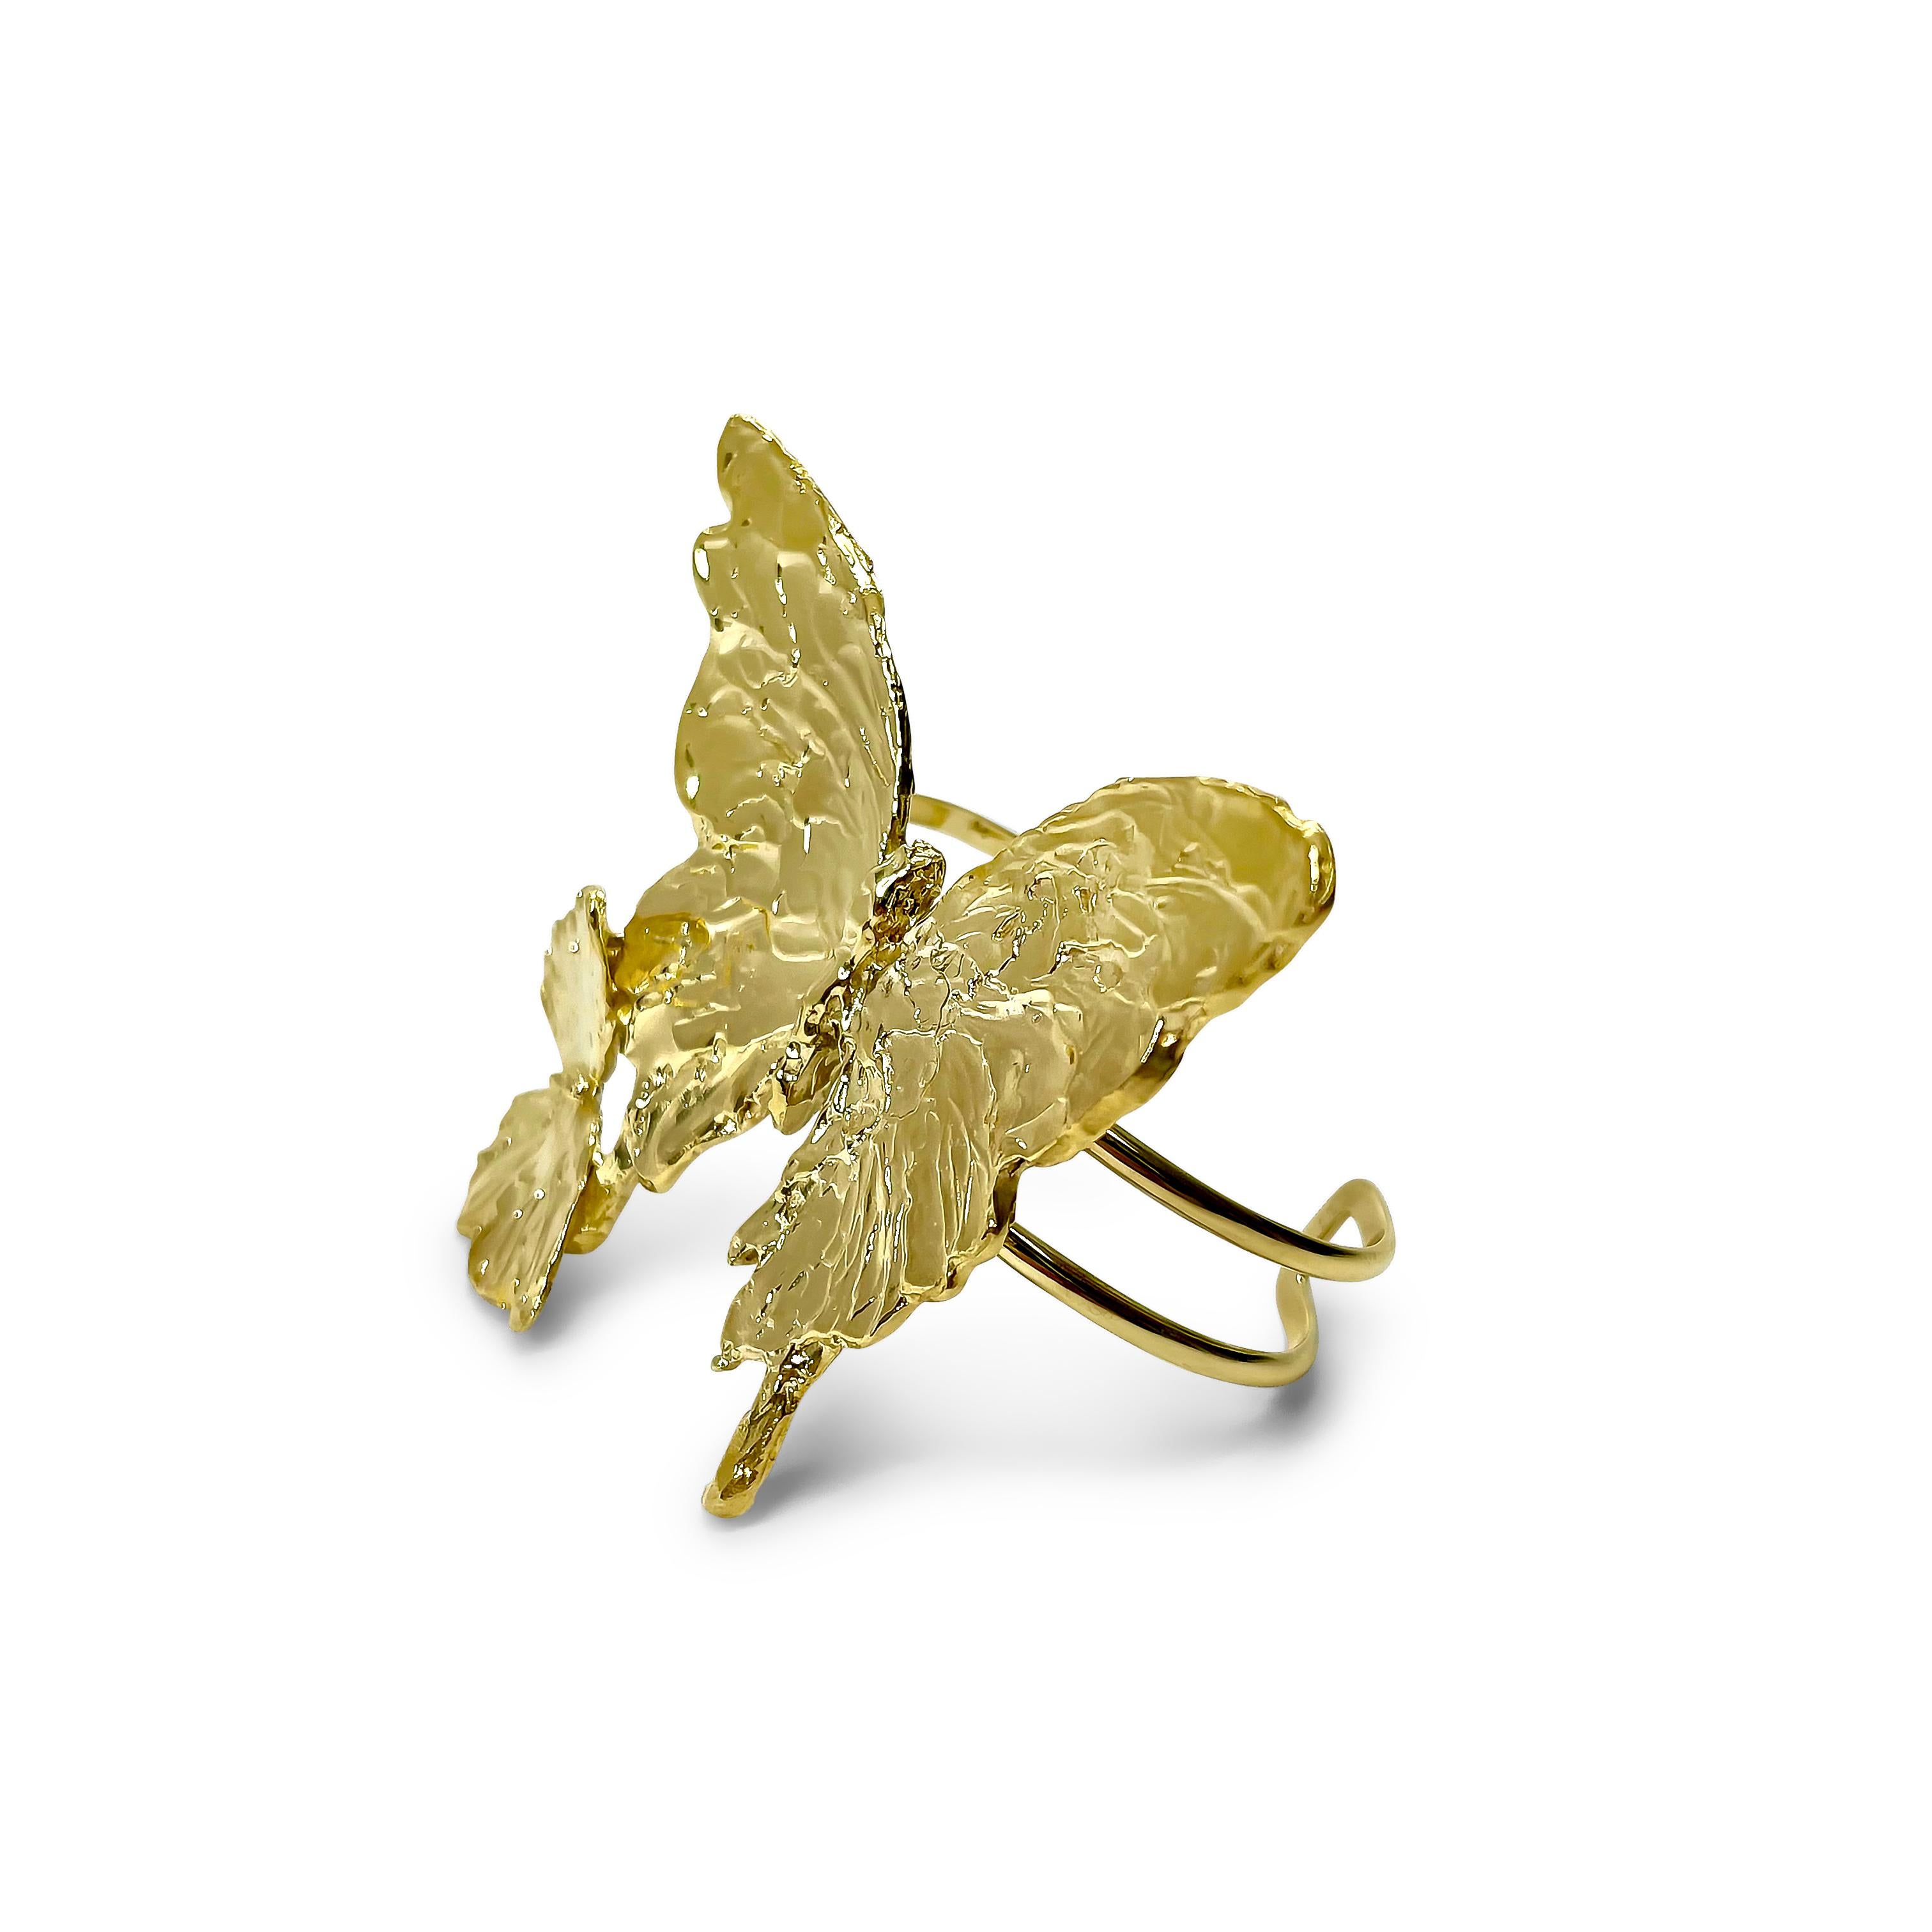 Intention: Wisdom

Design: Two hand carved butterflies fly in harmony, covering the expanse of the wrist  Comfortable Thai gold brass bands enclose the wrist comfortably so you'll never want to take this bracelet off!

Style Suggestions: ﻿Over a